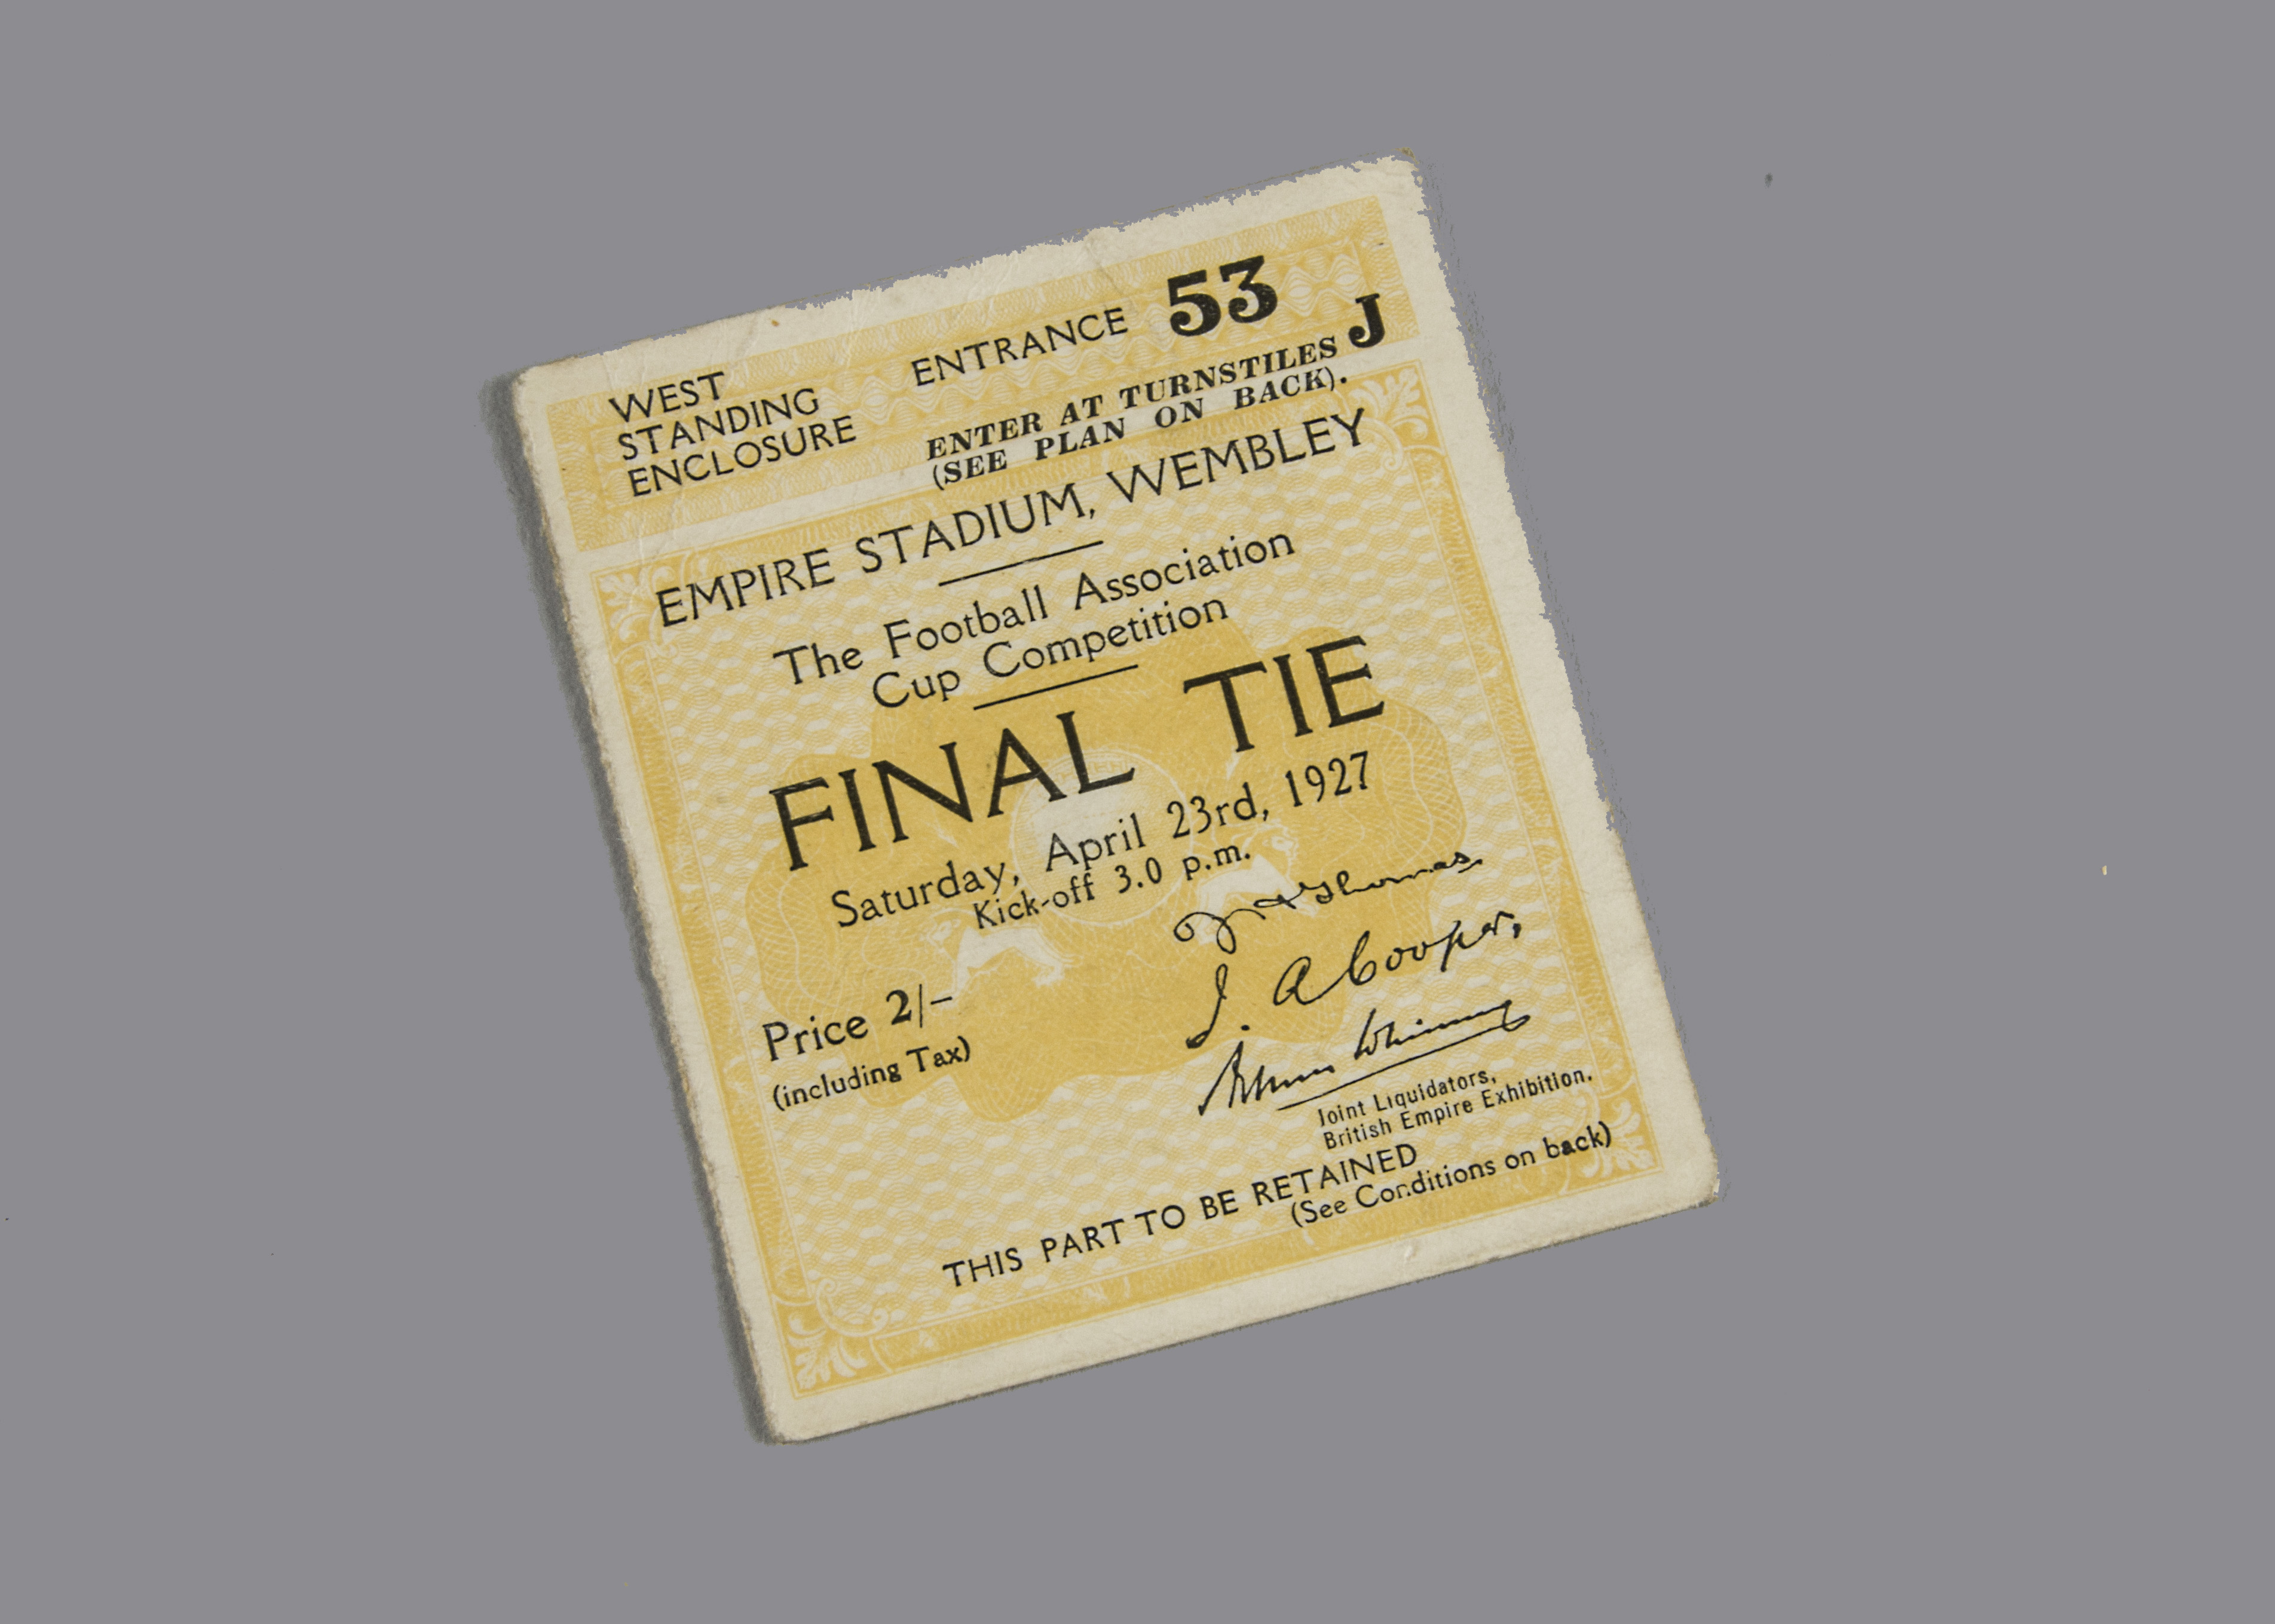 1927 Cup Final,  one 'part retained' ticket for Wembley final west standing enclosure, Saturday April 23rd 1927 Cardiff beat Arsenal 1-0